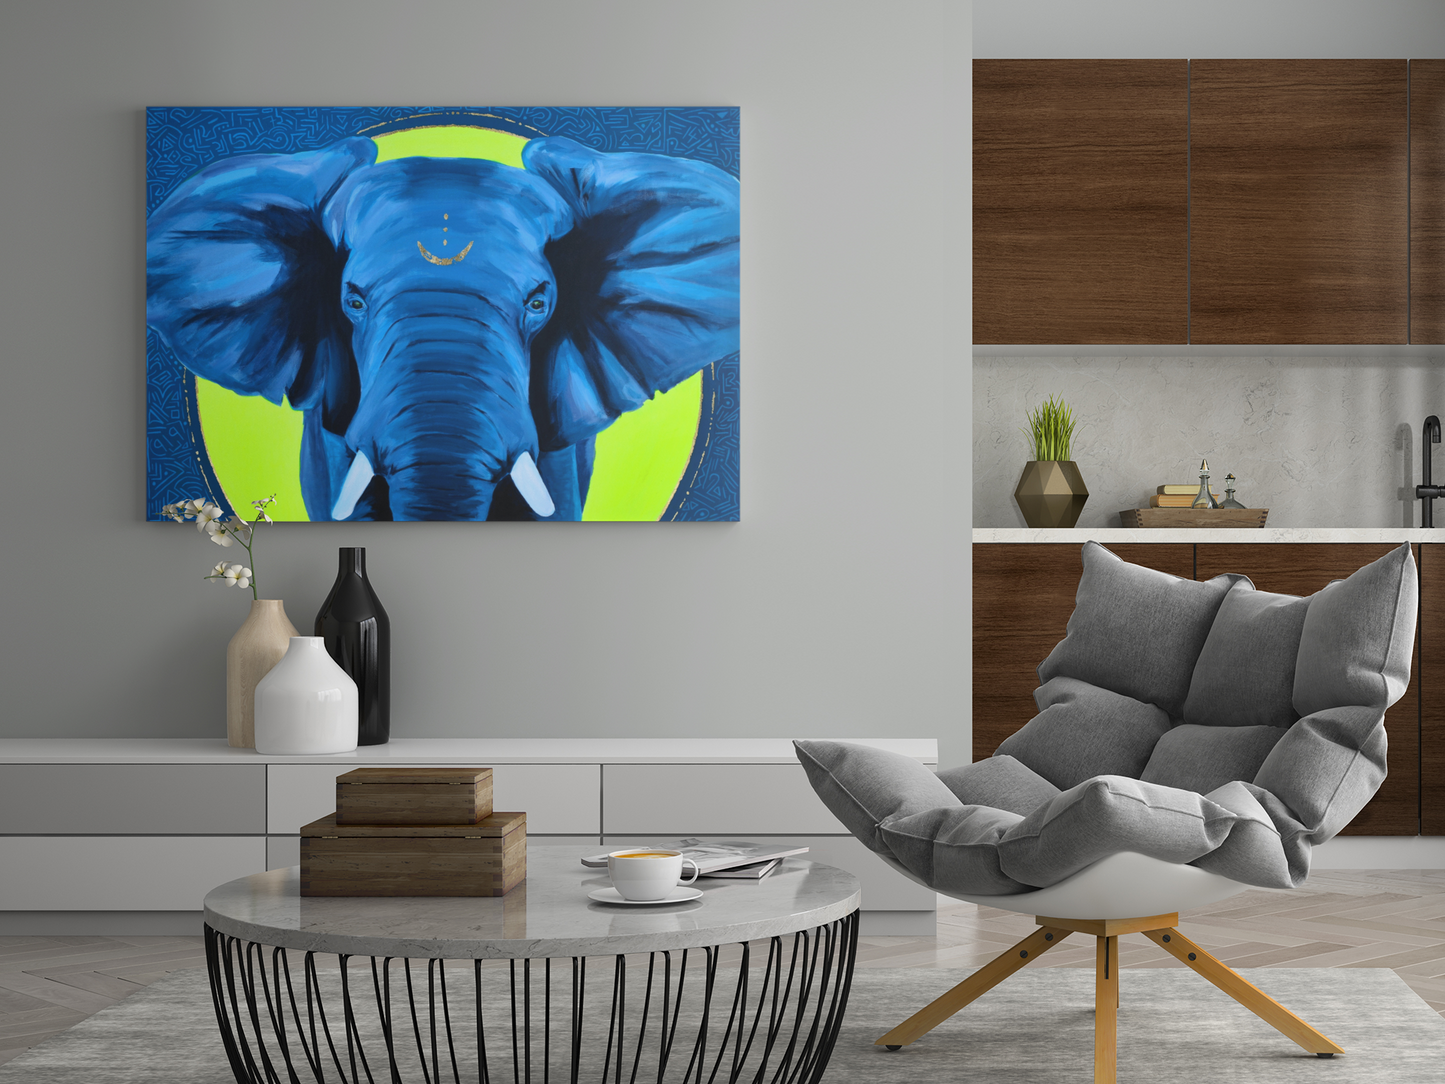 Acrylic painting of an African elephant hanging on the wall of a modern living room